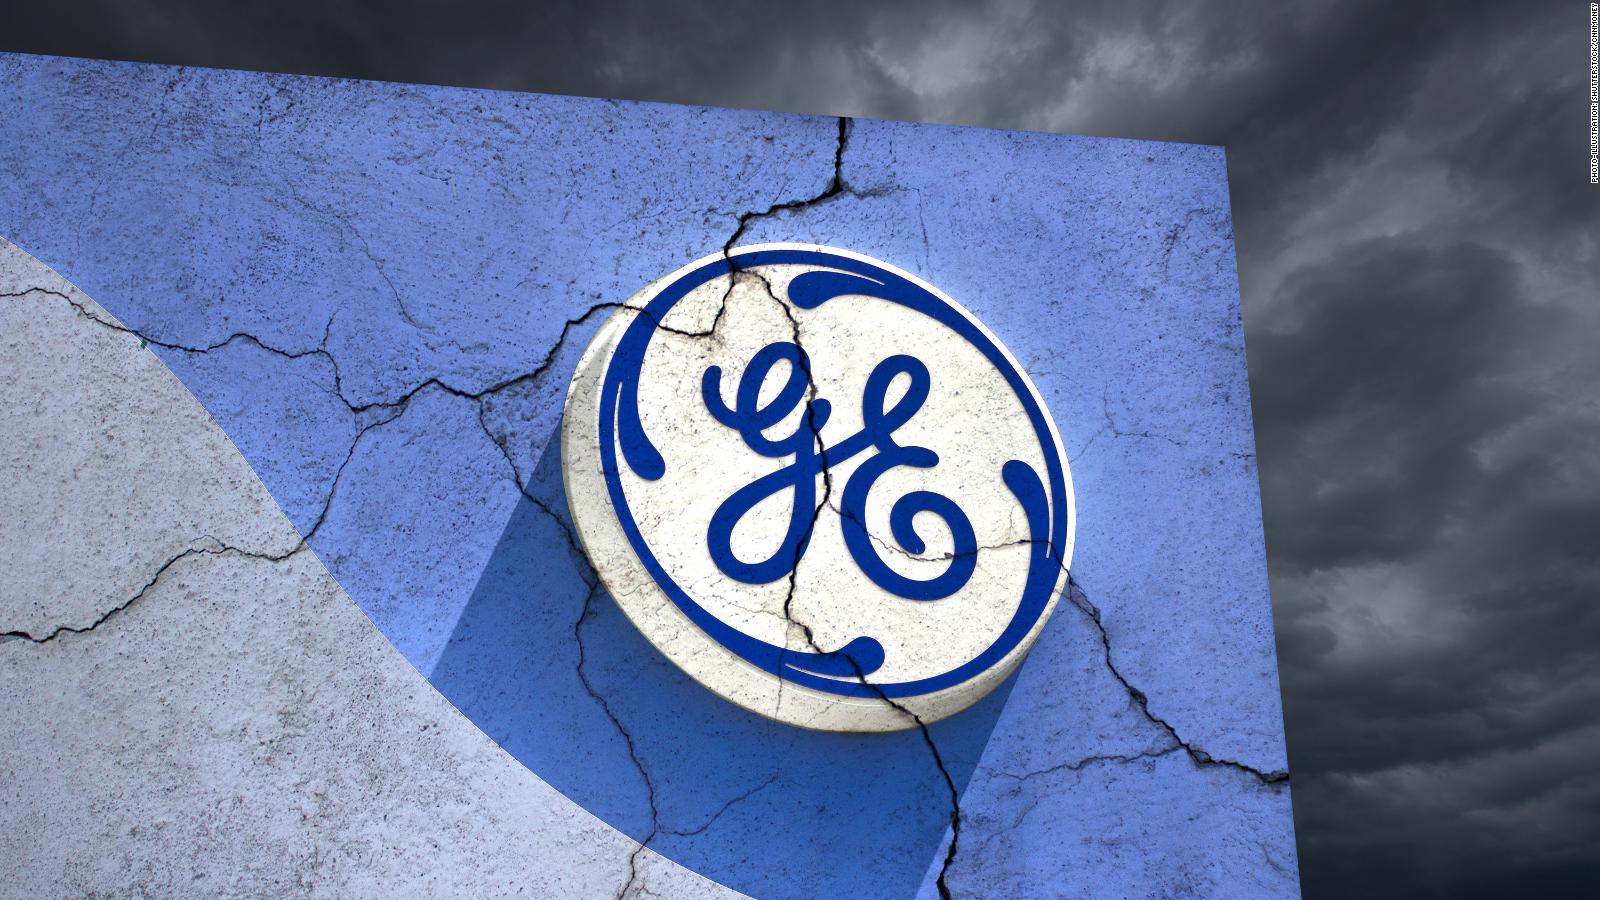 A series of securities investigations facing General Electric